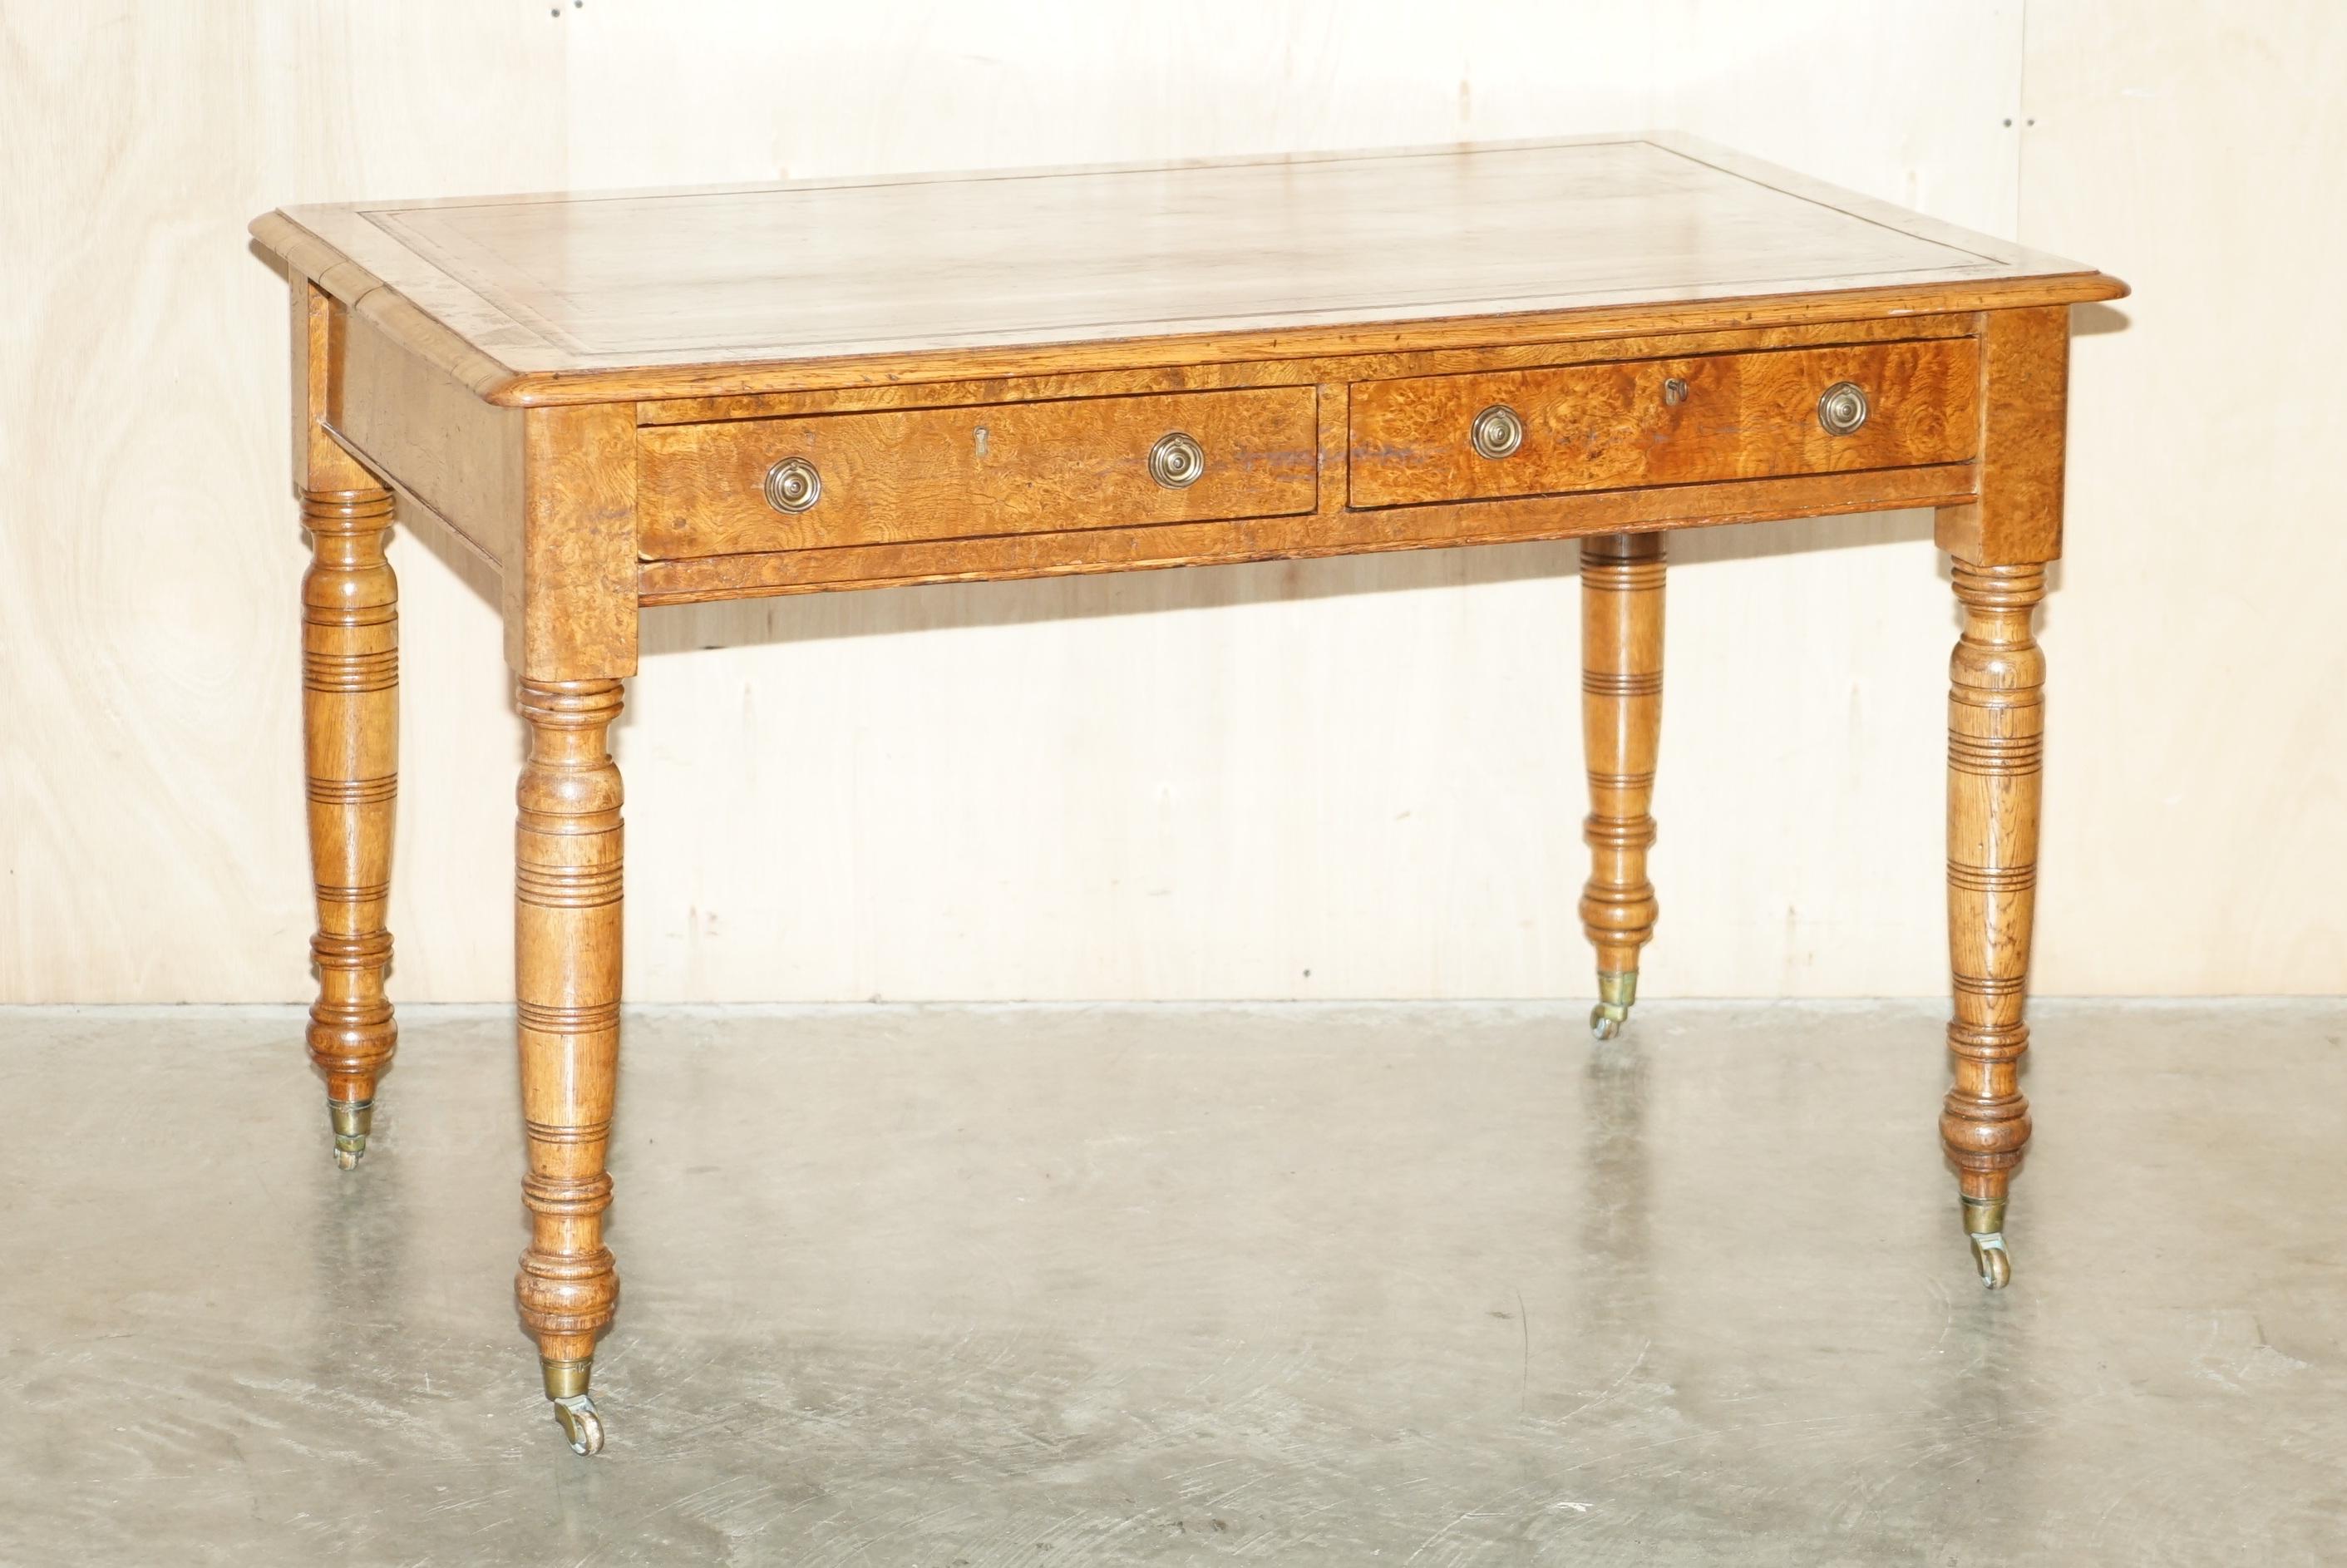 Royal House Antiques

Royal House Antiques is delighted to offer for sale this stunning rare and original Circa 1840 Pollard Oak Library writing table or desk with Chestnut Brown leather writing surface 

Please note the delivery fee listed is just